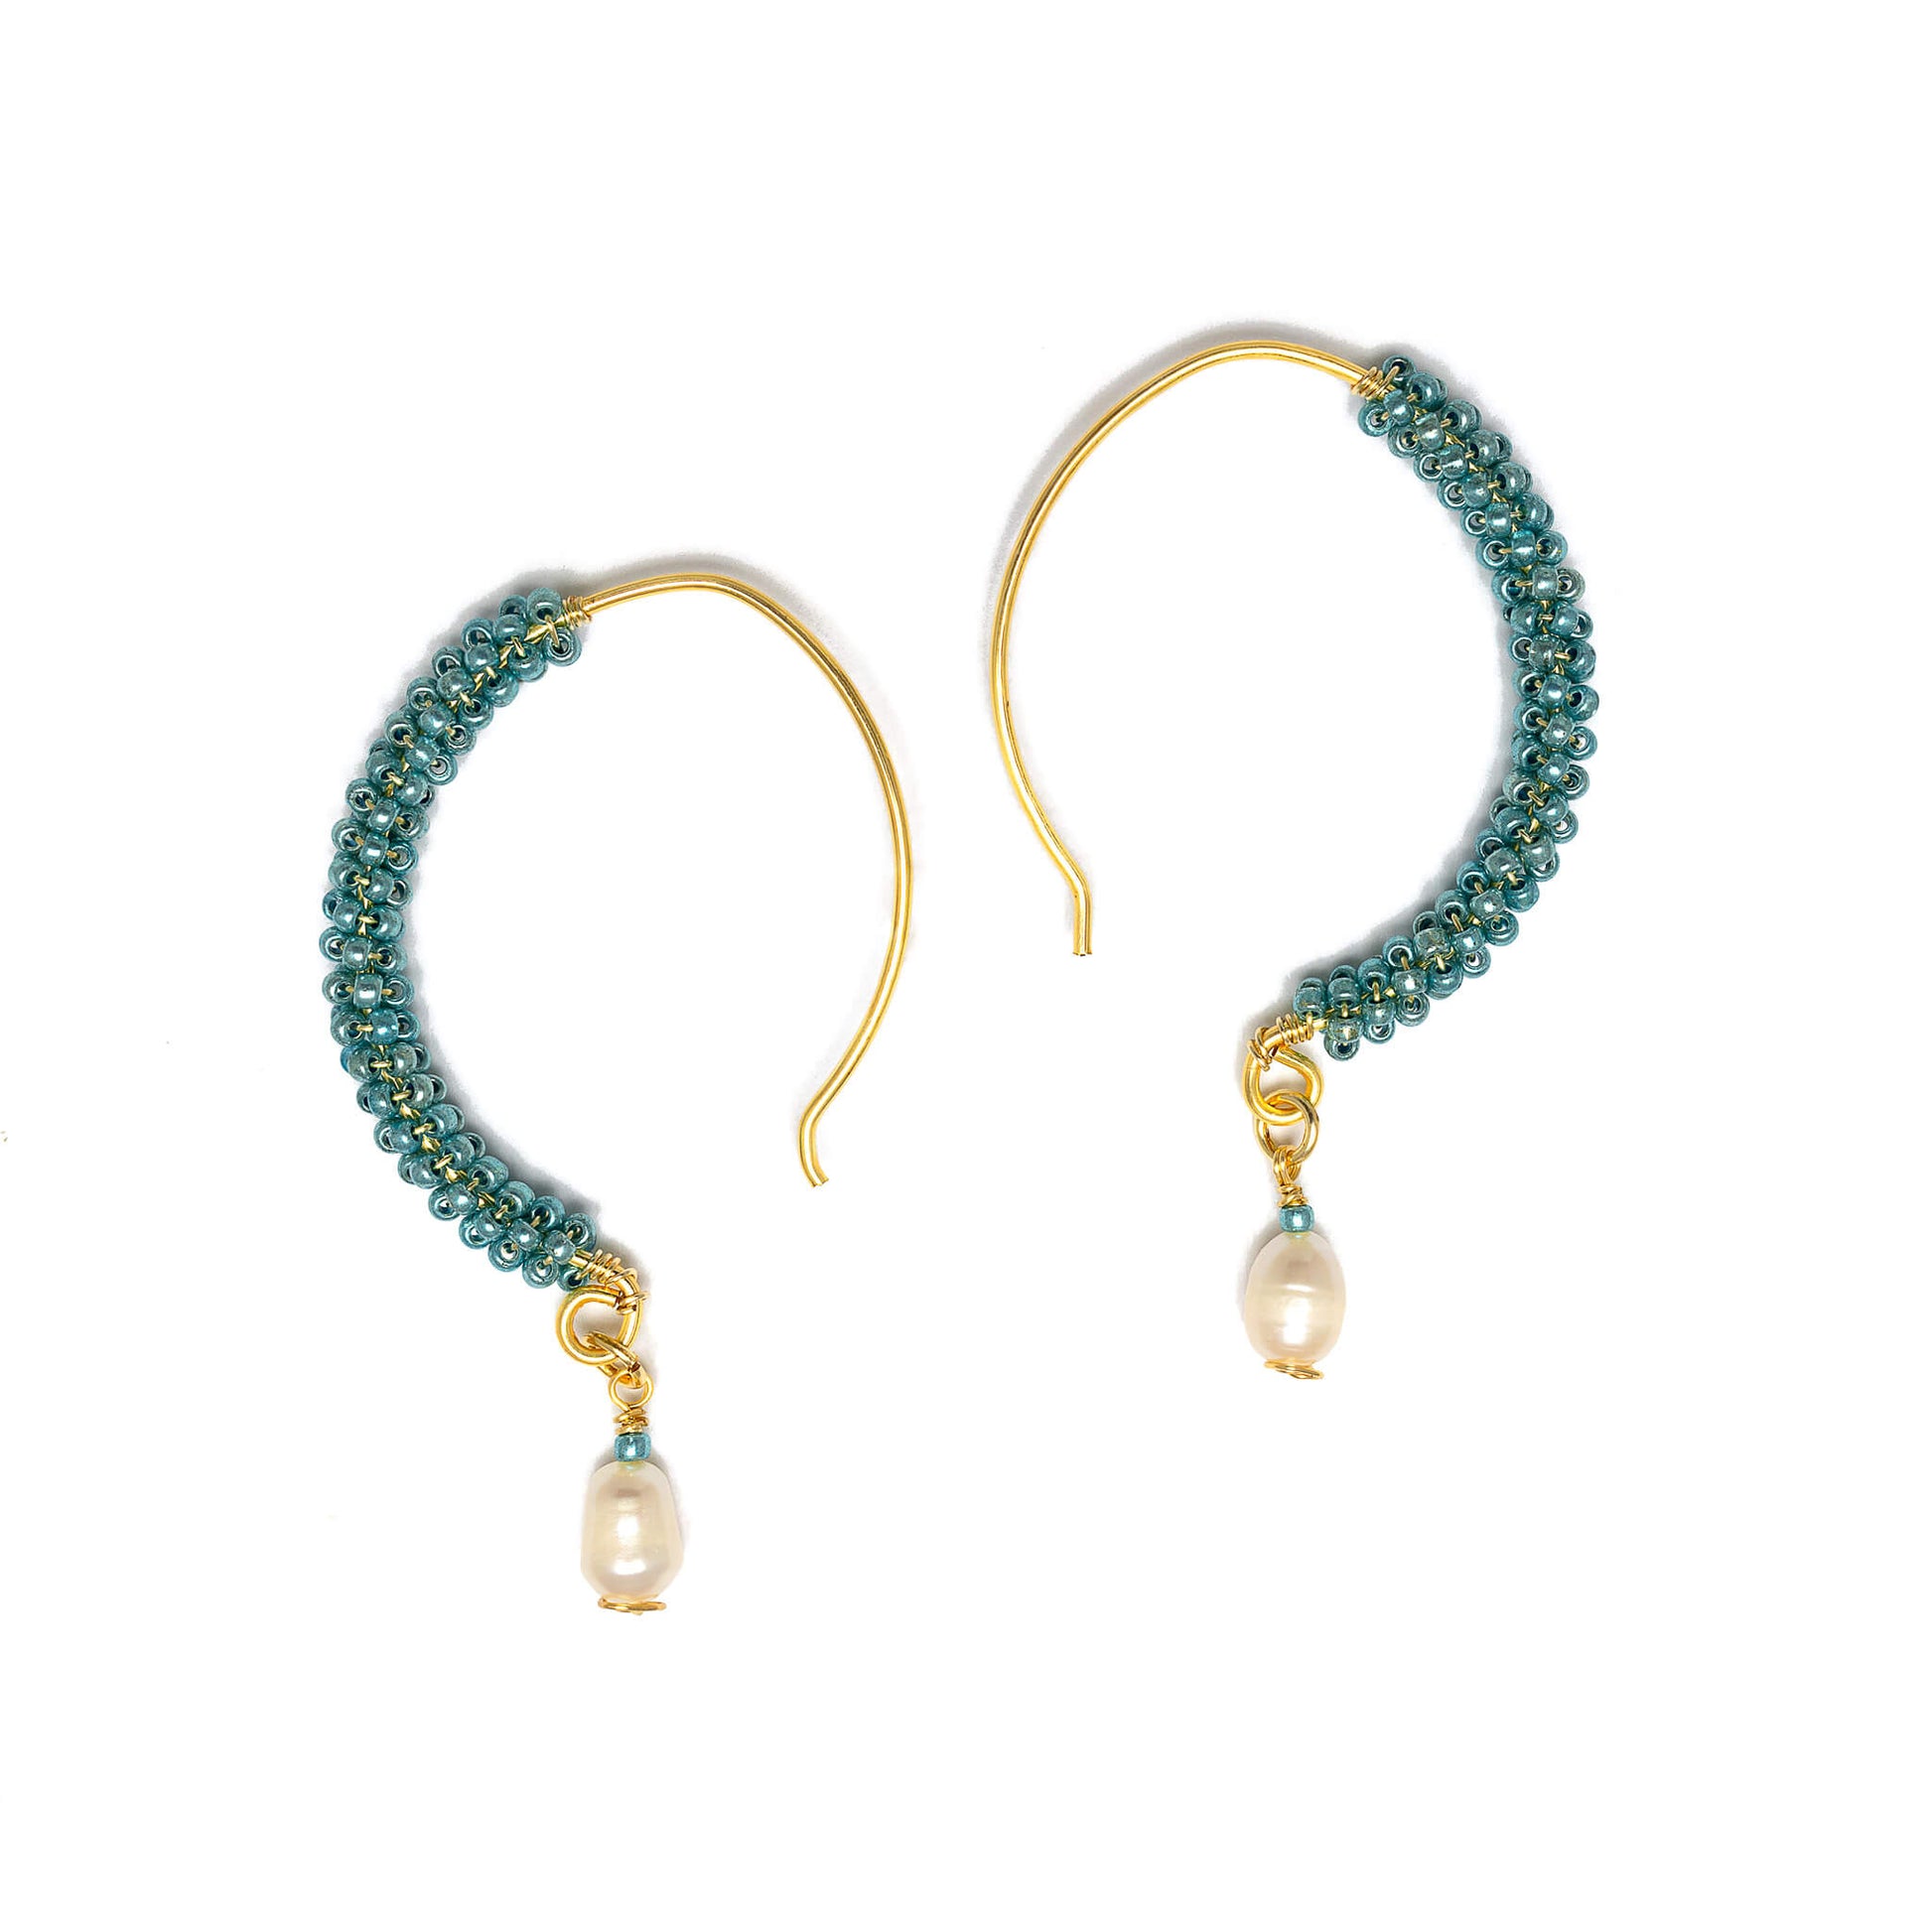 Ancora Gold Hoop Earrings are 2.5 inches long. Gold, Aqua, and White hoops. Handcrafted with Seed Beads Crystals, gold-plated wire, and freshwater pearl. Beaded Fish hook earrings.